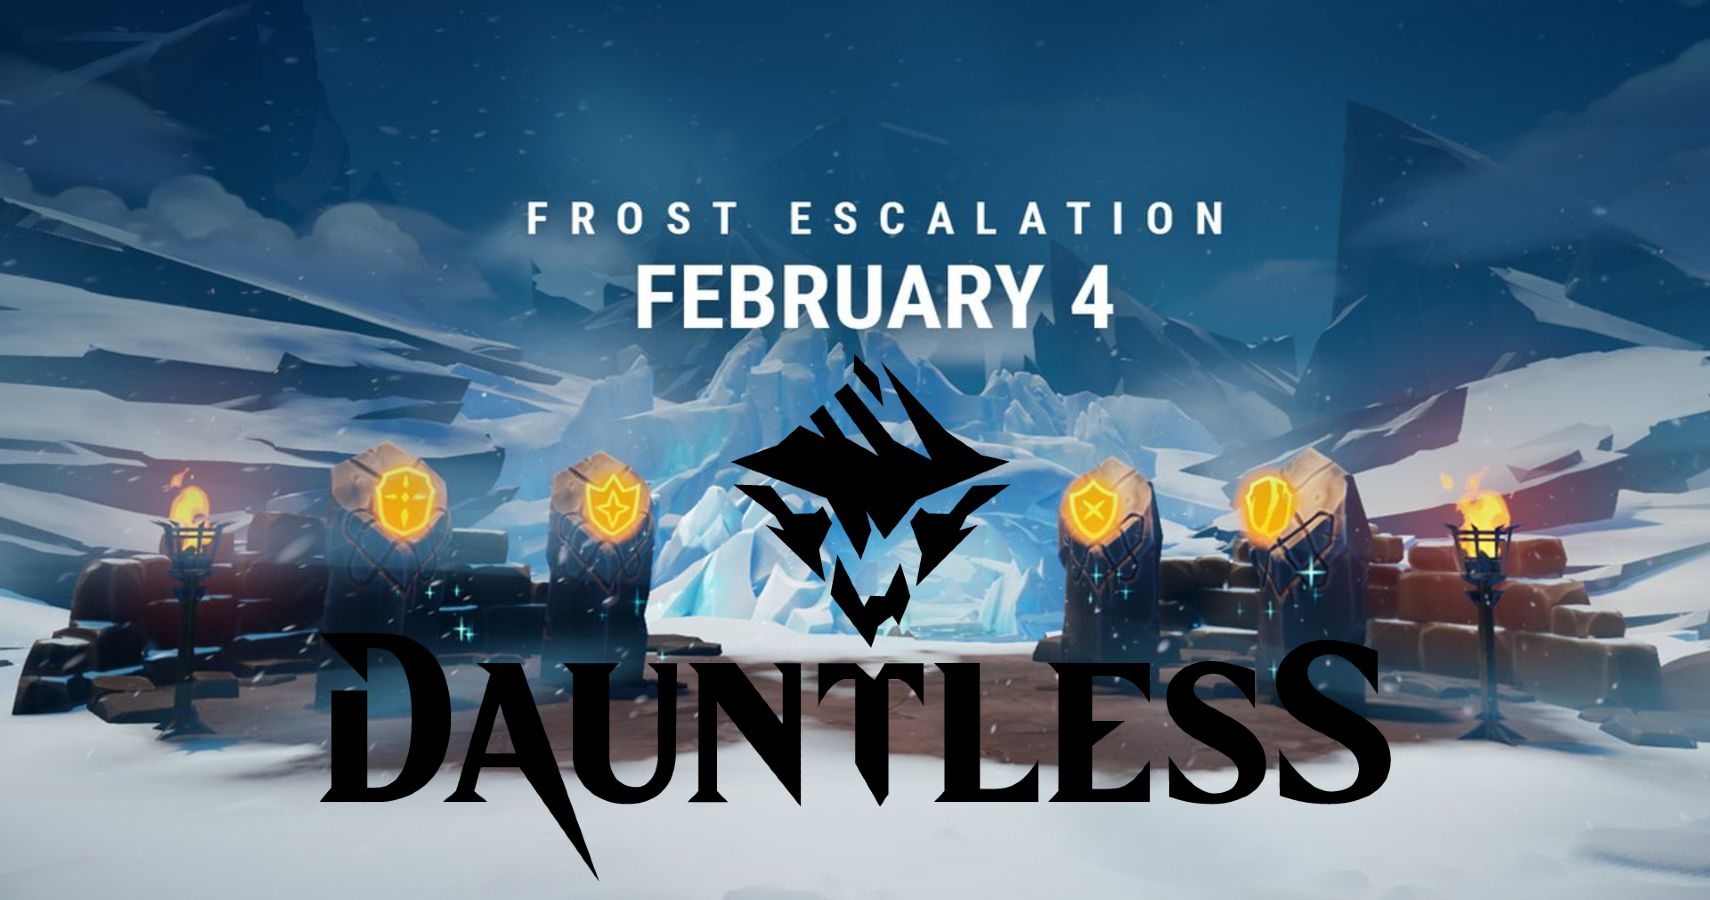 Dauntless Launches Frost Escalation On February 4